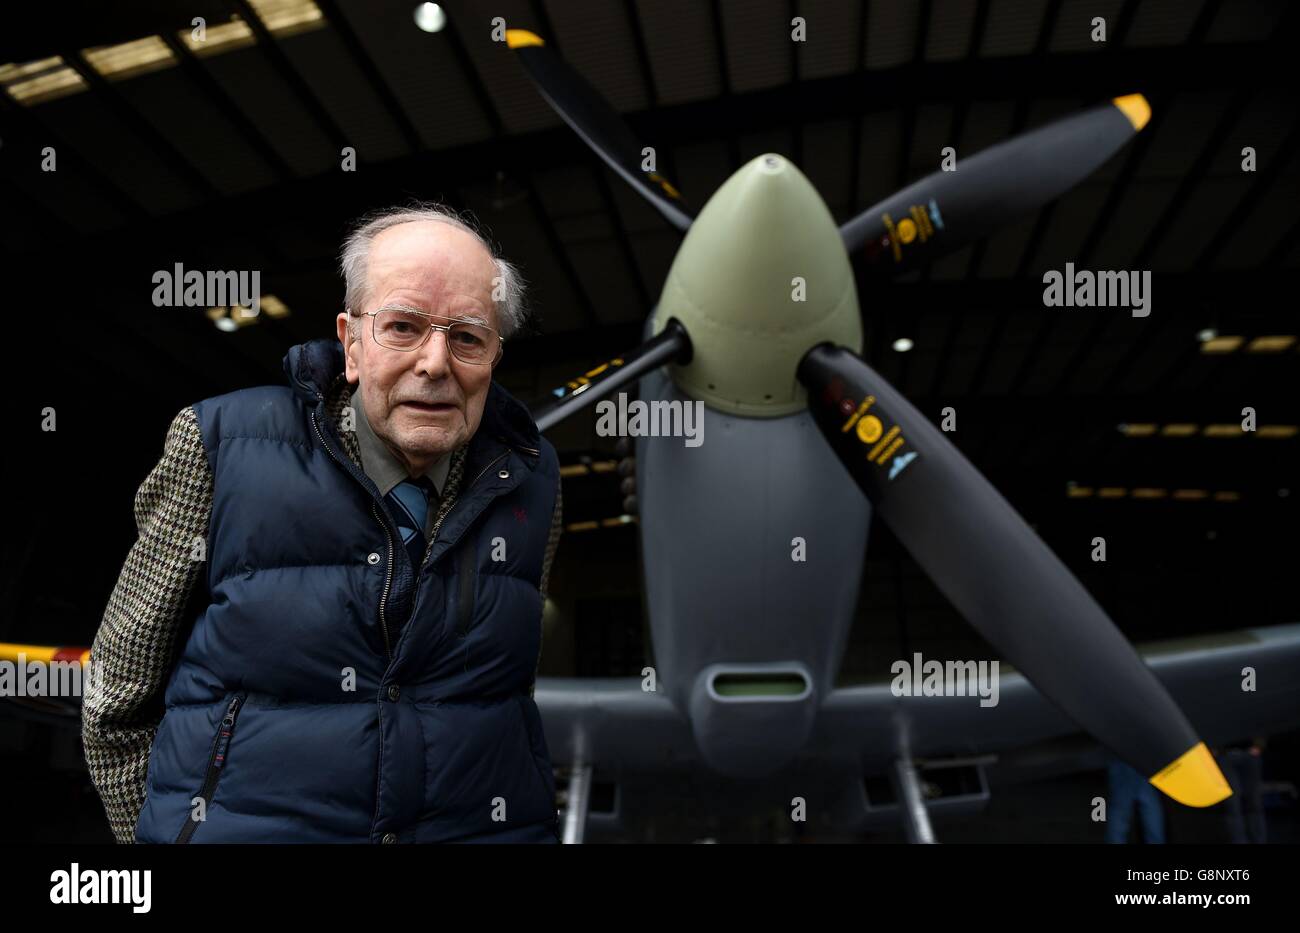 Gordon Monger, who was part of the Supermarine Spitfire design team during the Second World War, poses next to a spitfire before it prepares to take off from Southampton Airport to mark the 80th anniversary of the first Spitfire flight. Stock Photo